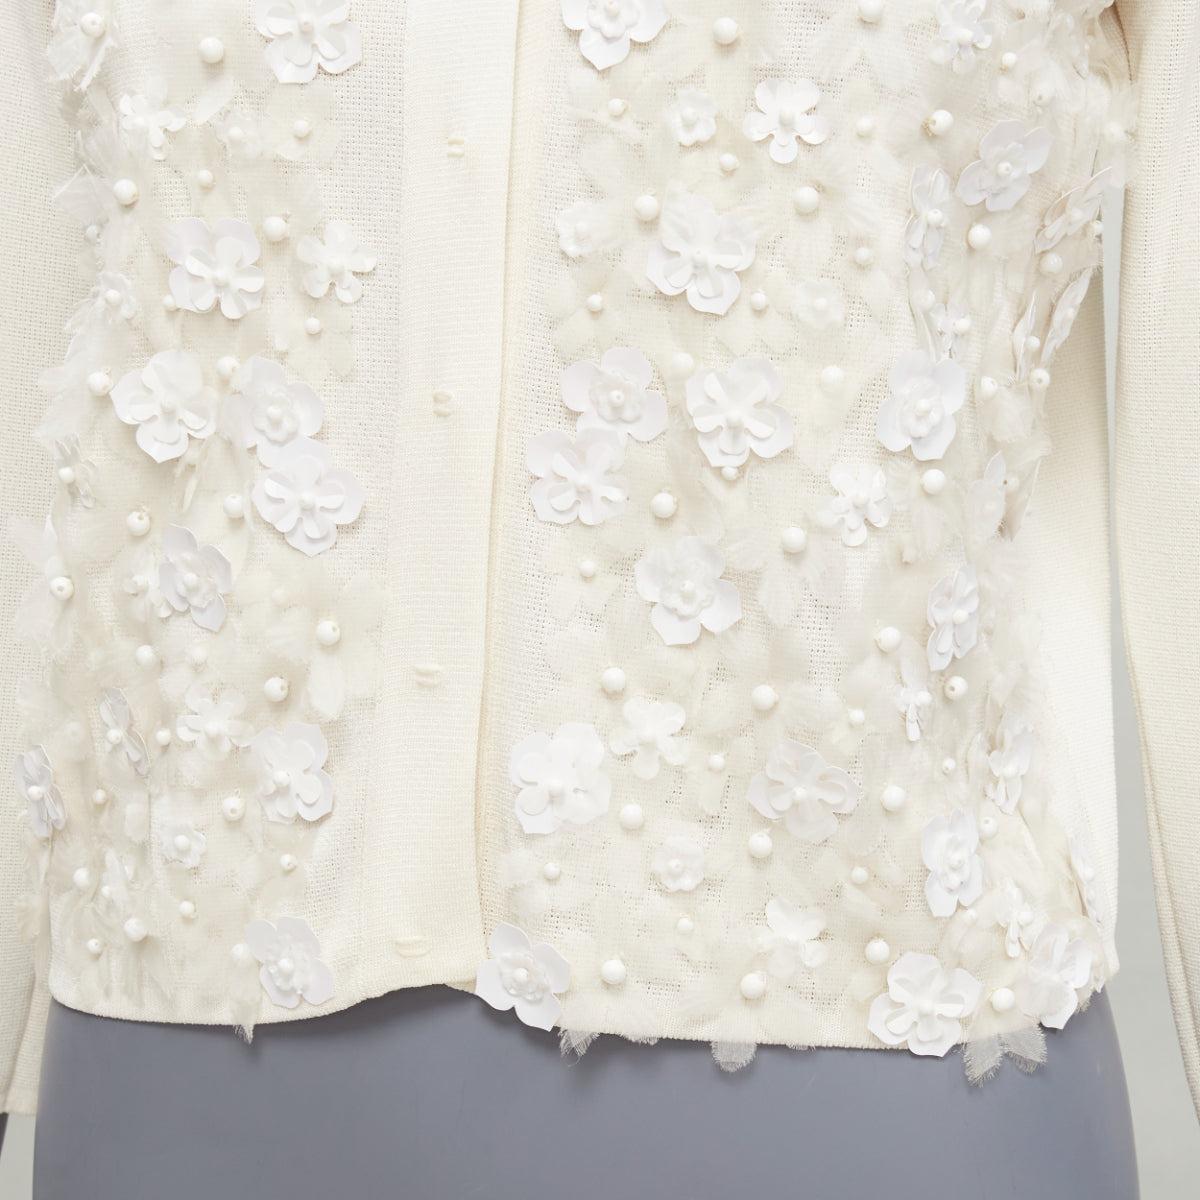 GIAMBATTISTA VALLI ivory white floral embellished cropped cardigan IT38 XS
Reference: LNKO/A02234
Brand: Giambattista Valli
Designer: Giambattista Valli
Material: Viscose, Blend
Color: White, Cream
Pattern: Floral
Closure: Snap Buttons
Extra